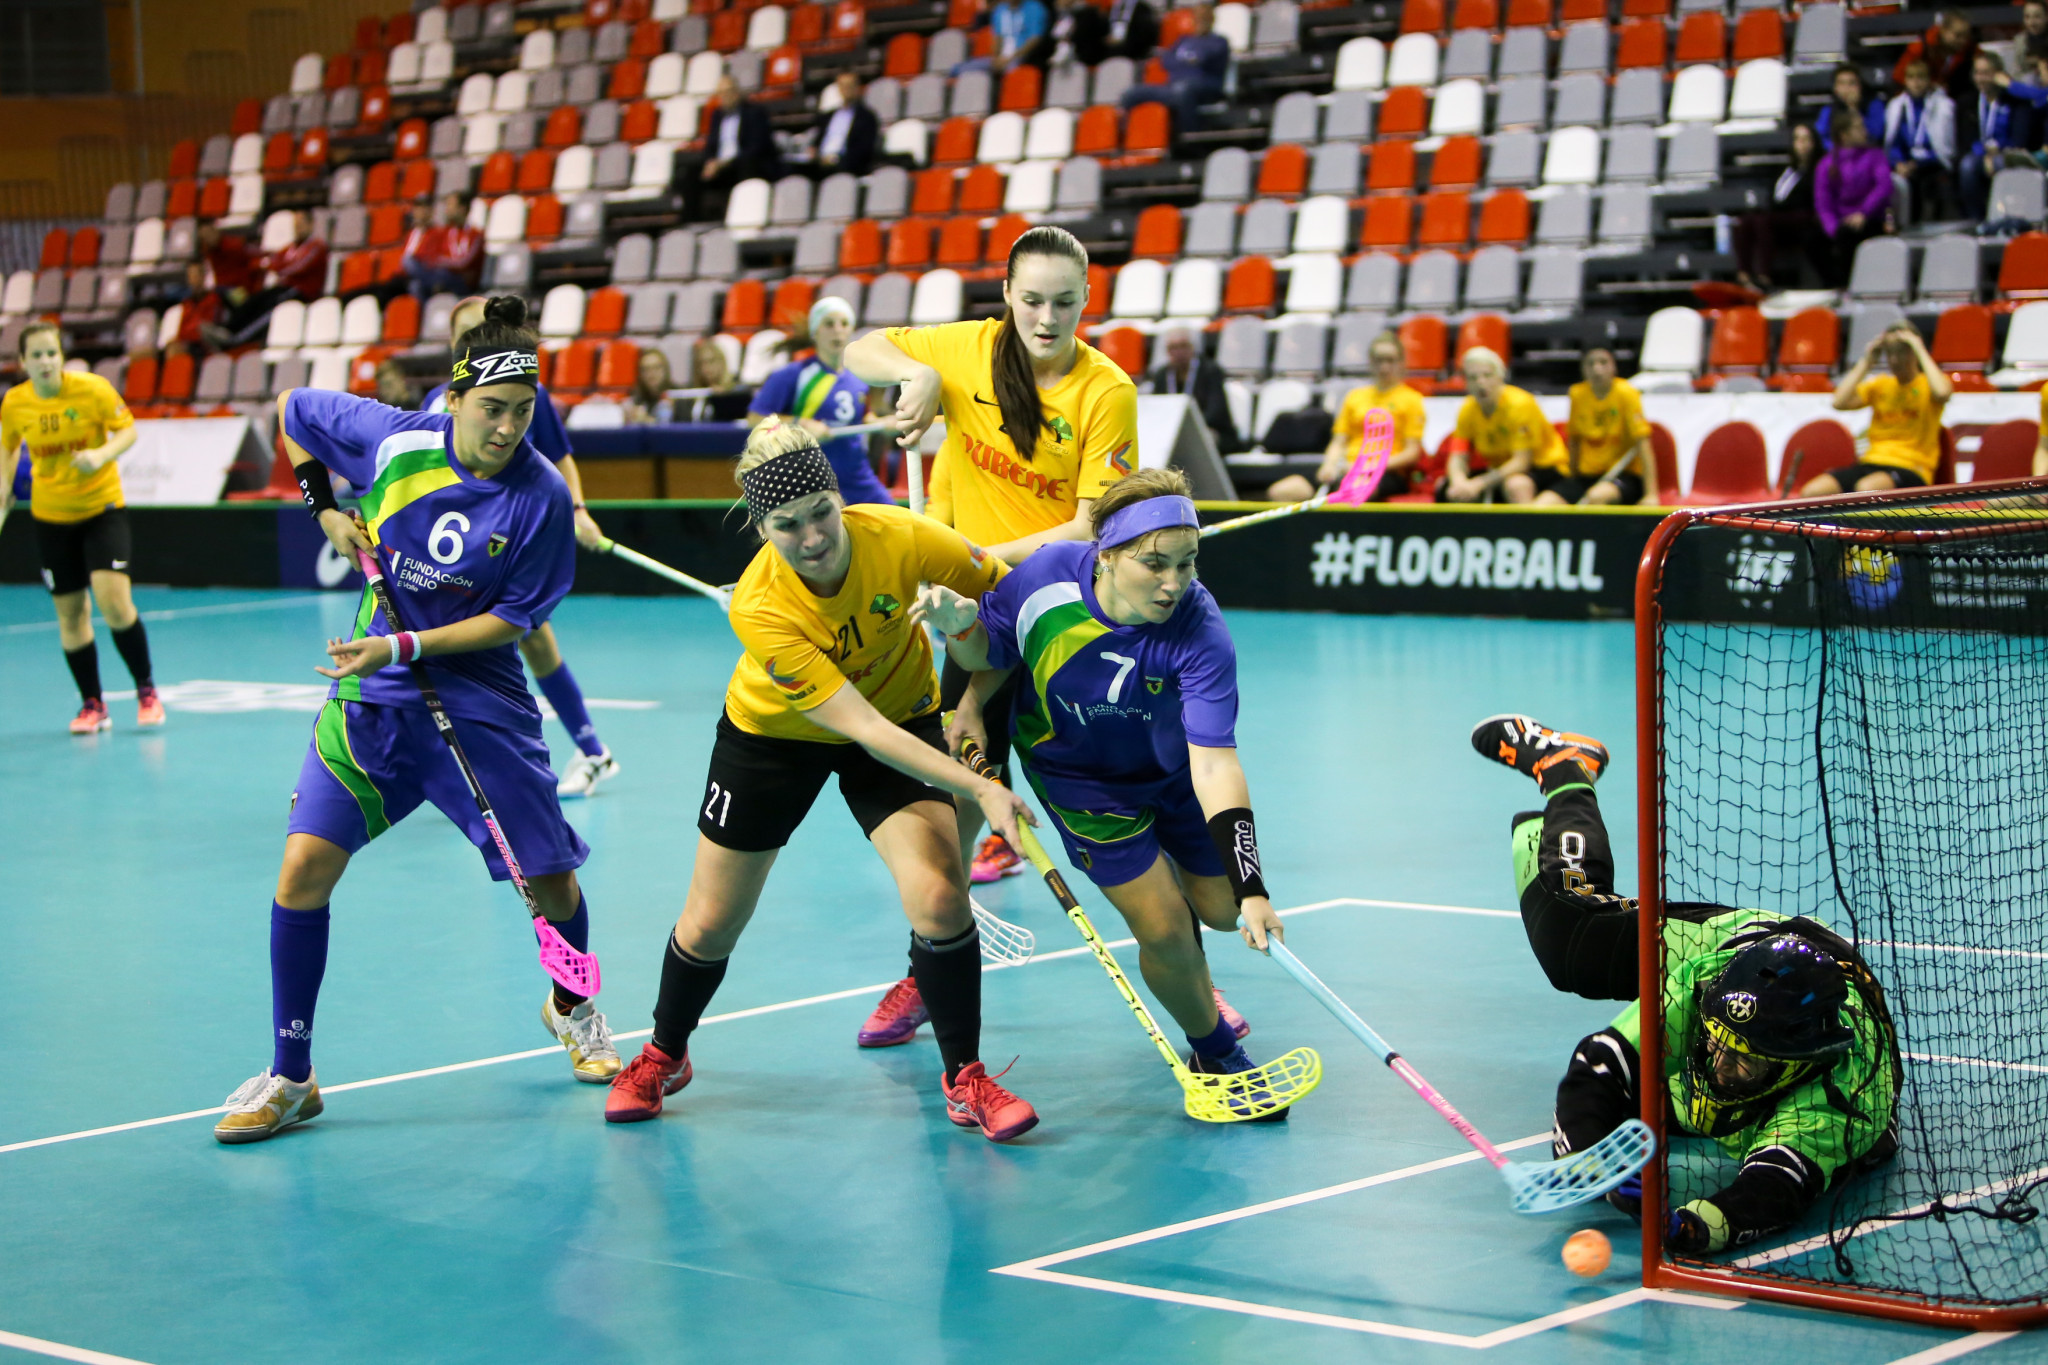 The seminar will be held in conjunction with the 11th Women’s World Floorball Championships ©IFF